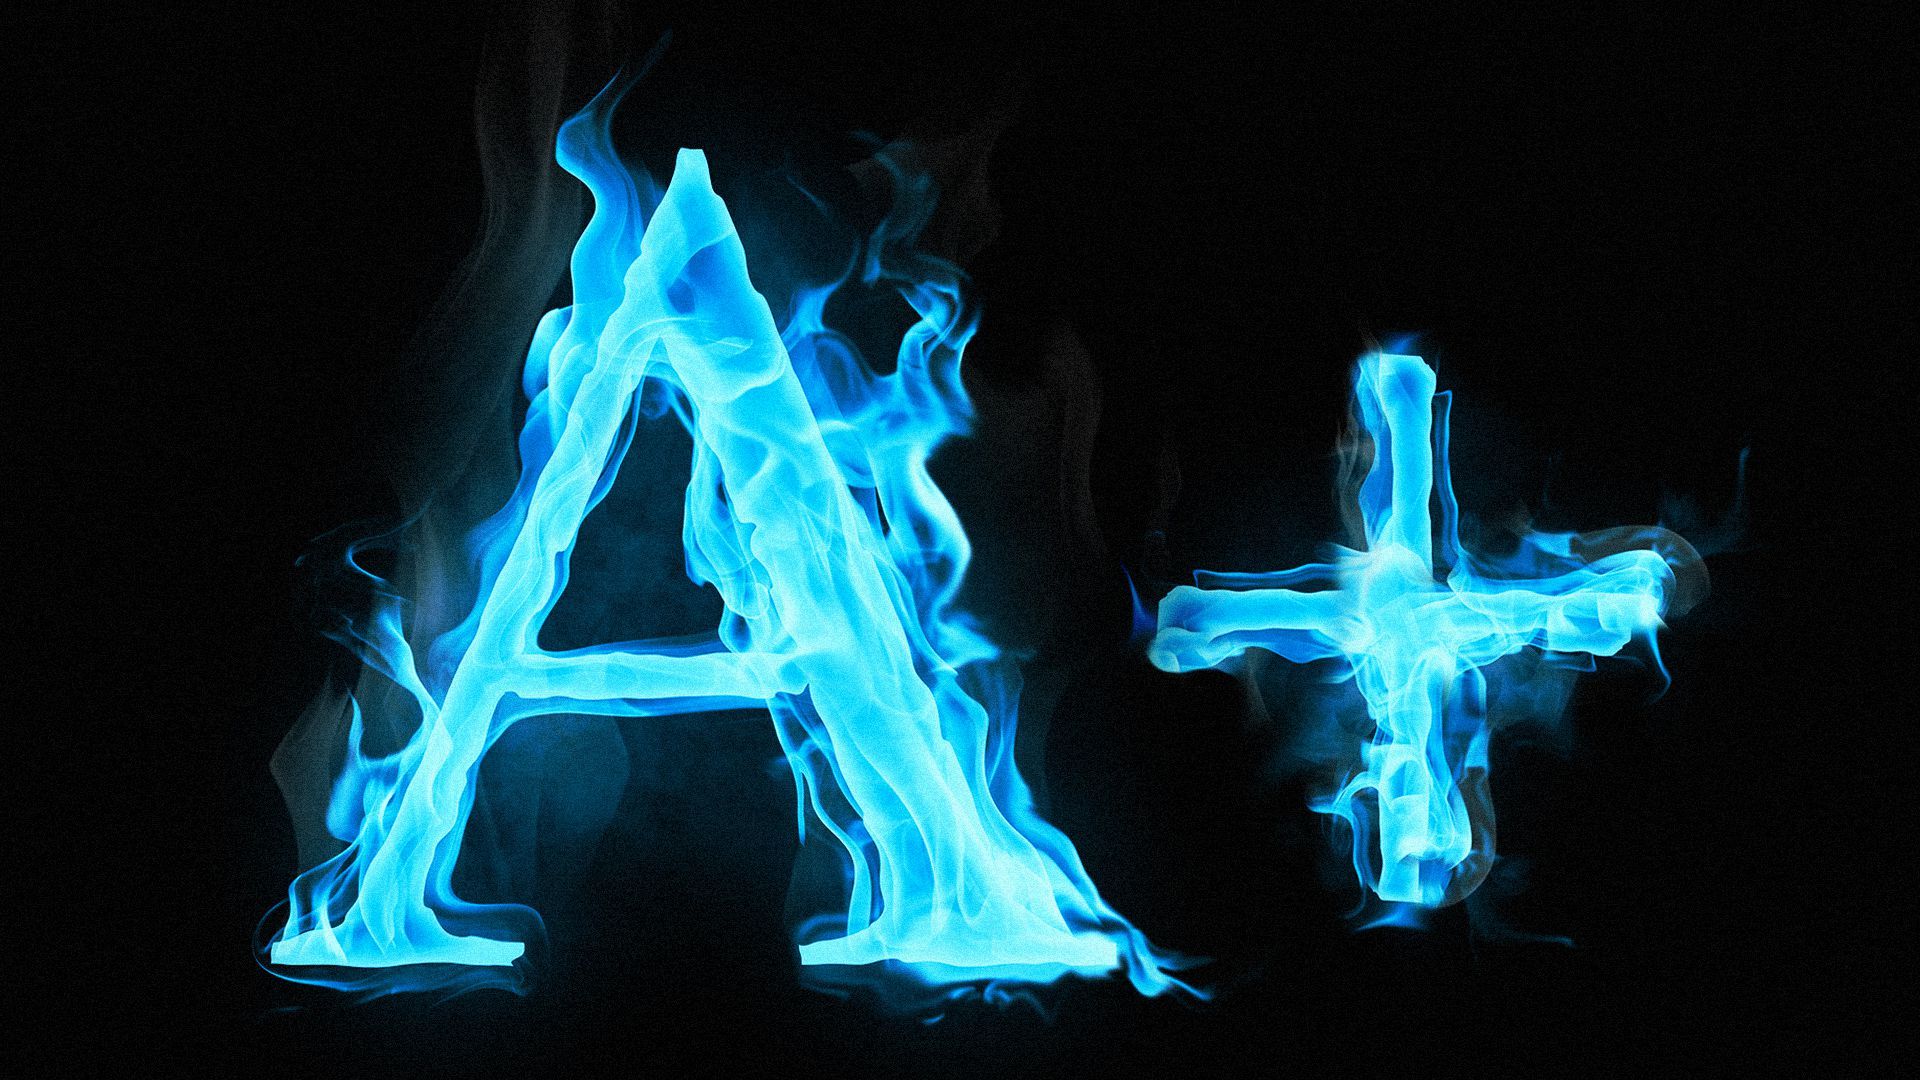 Illustration of the letters "A+" made from blue flame. 